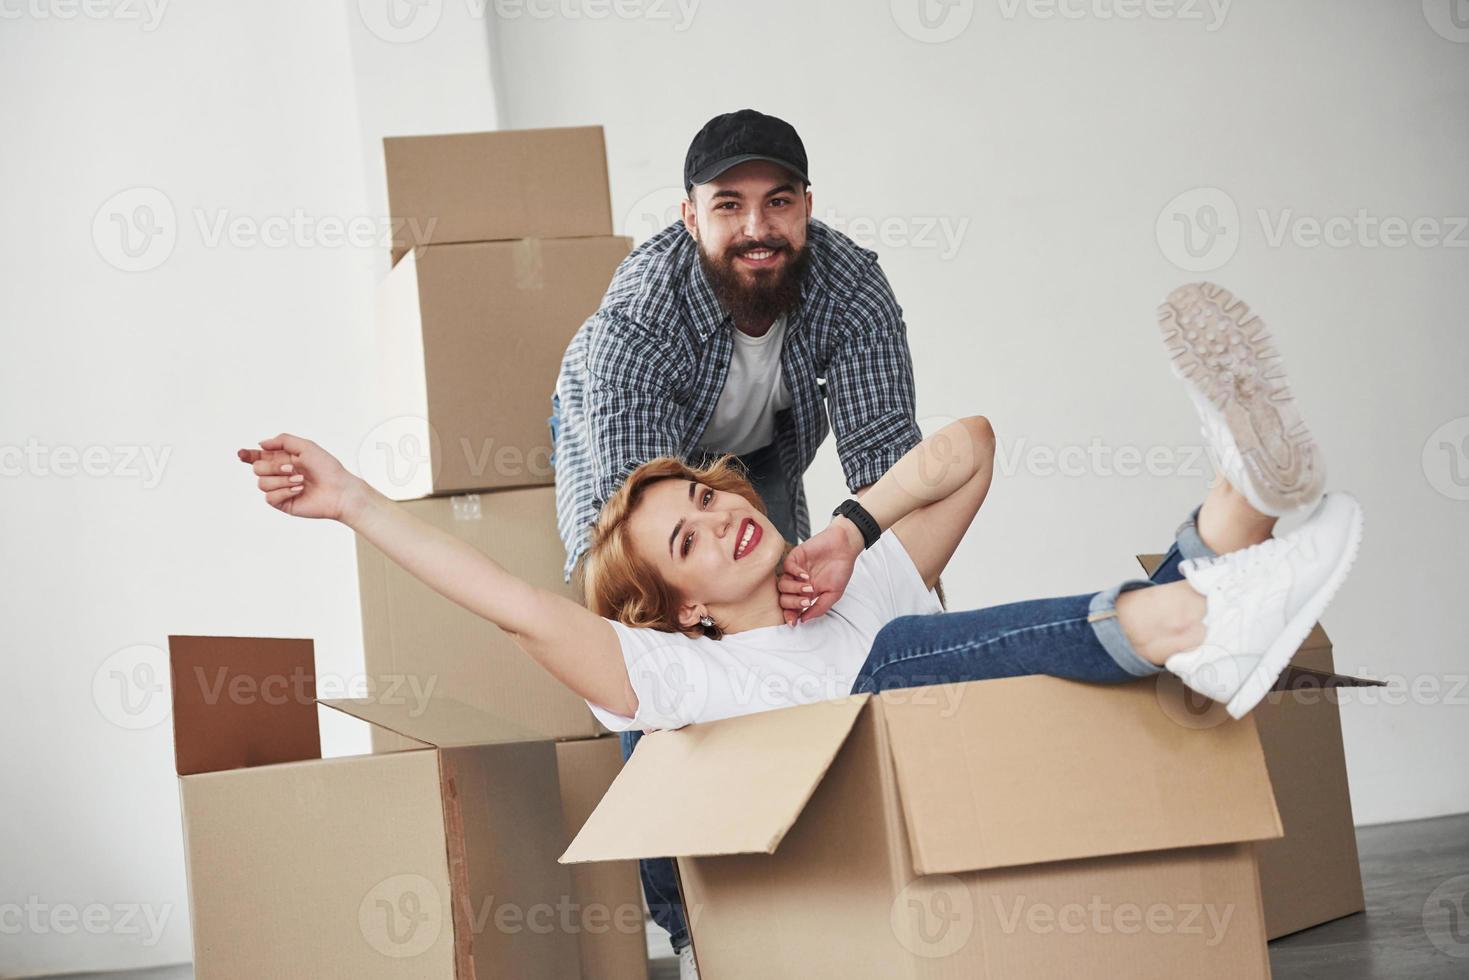 Relaxation when sitting in the empty box. Happy couple together in their new house. Conception of moving photo